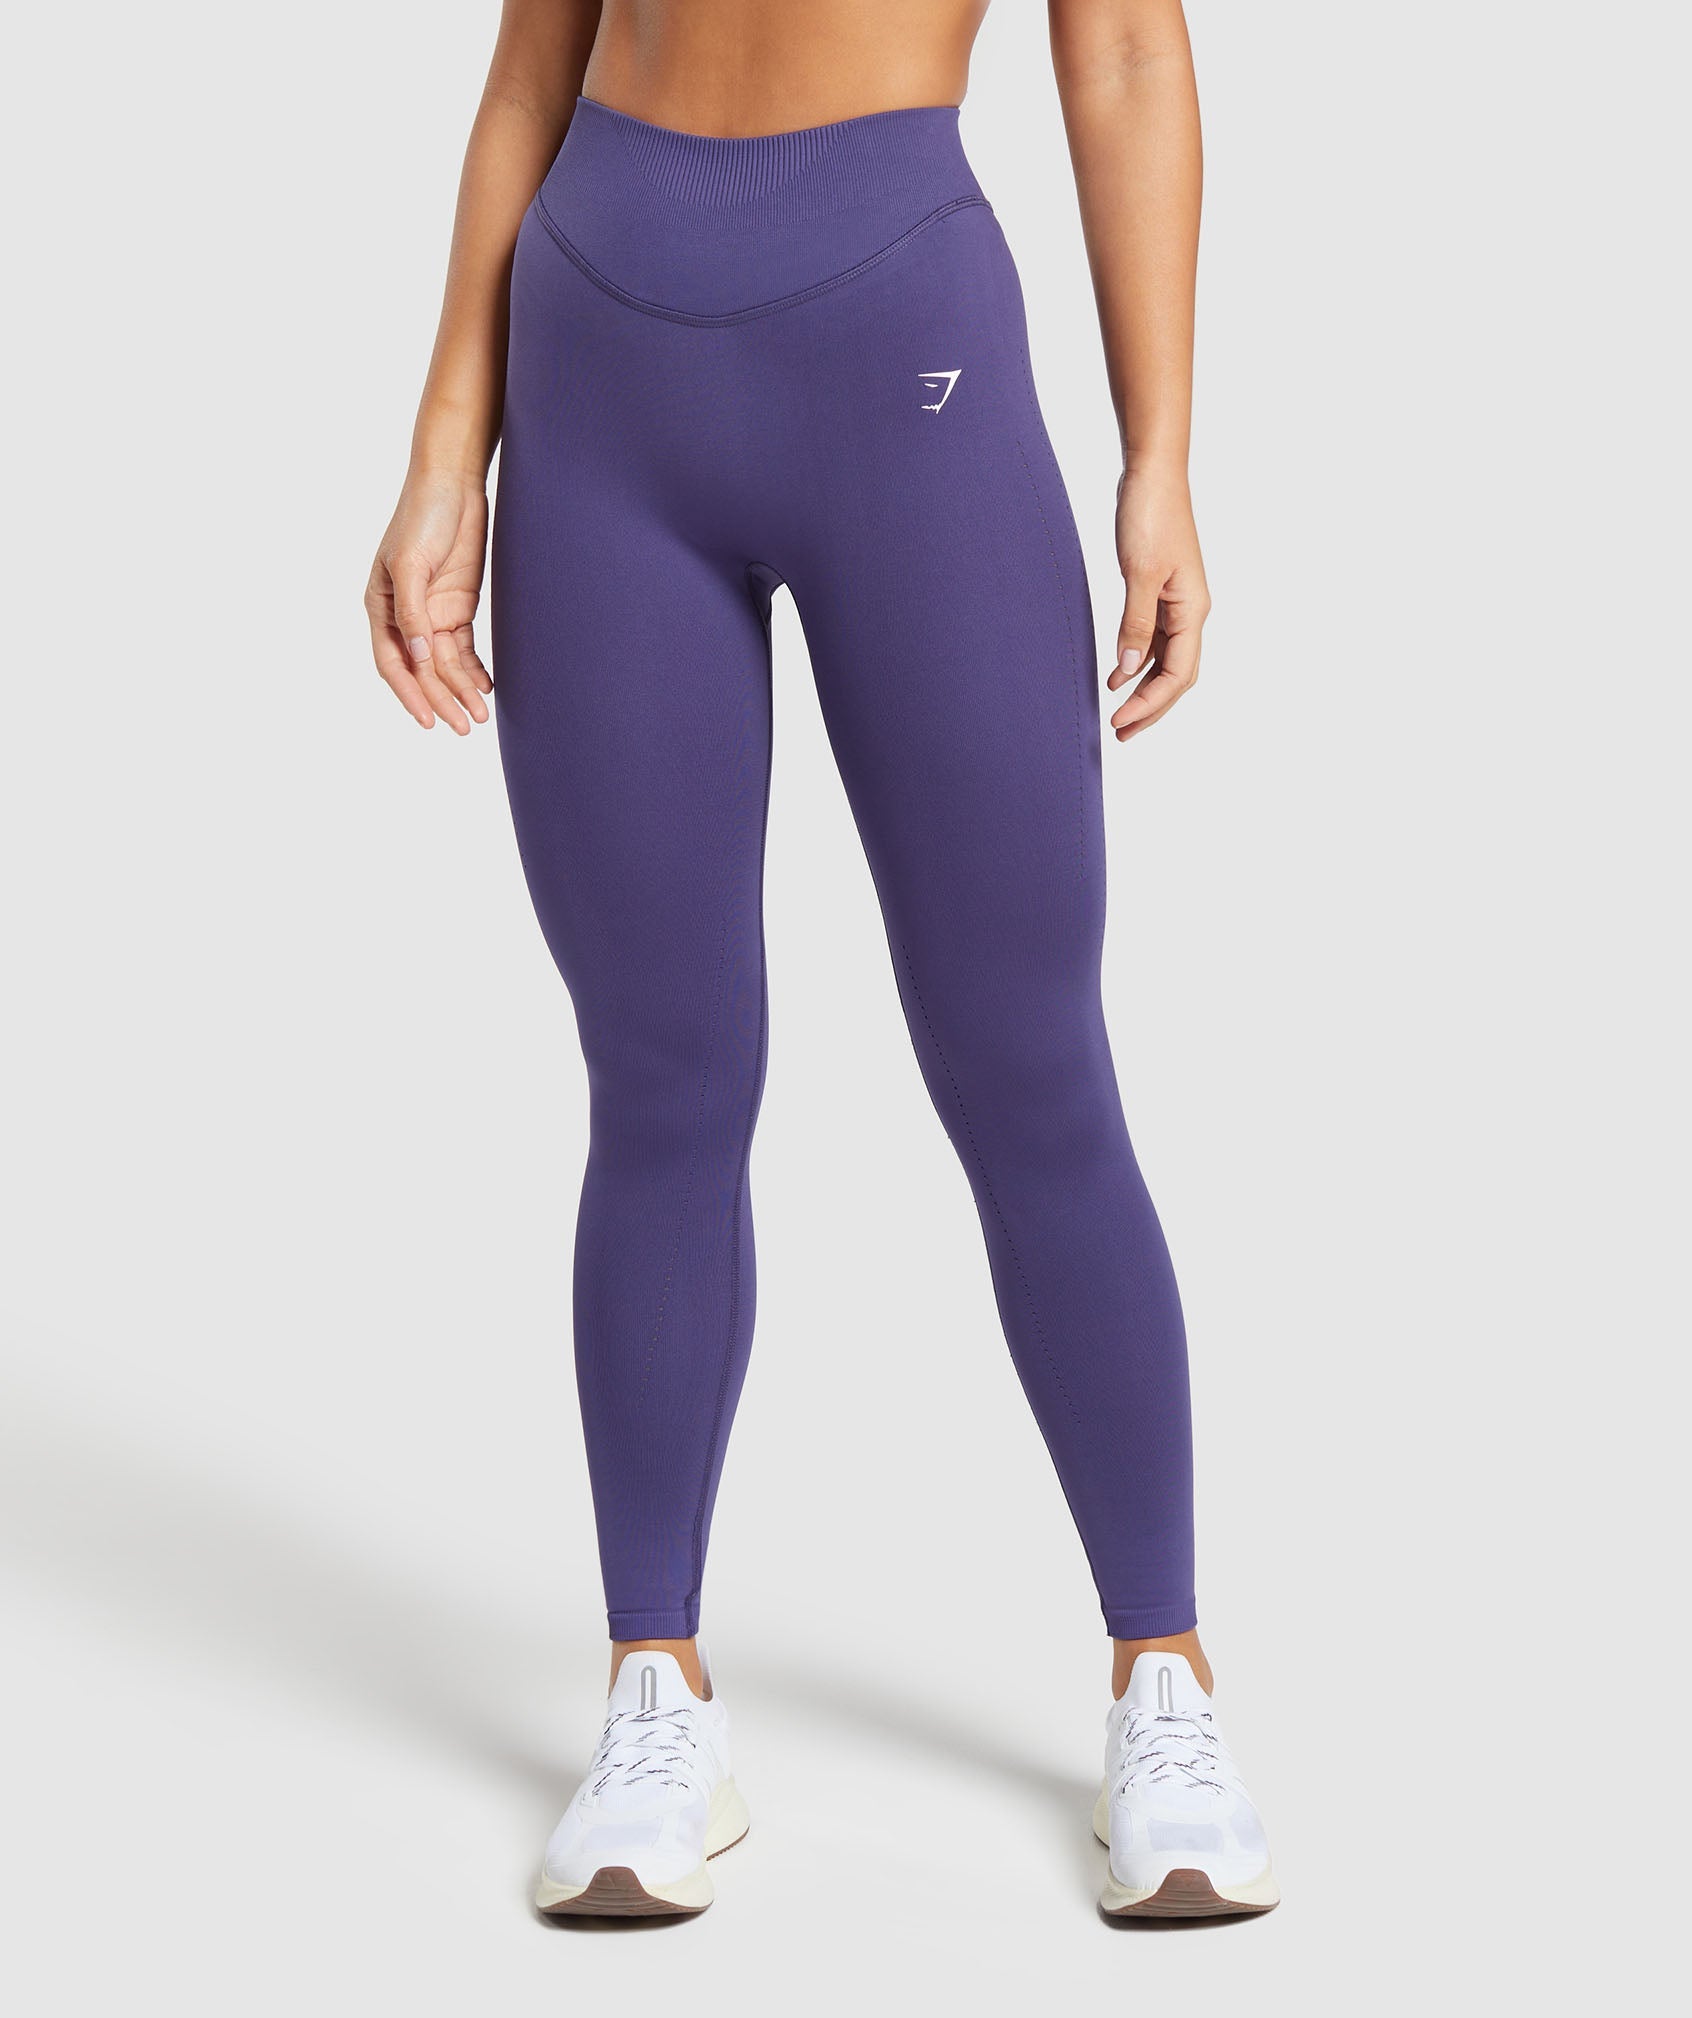 Gym Shark Outfit Purple  Womens workout outfits, Gym clothes women, Cute  workout outfits